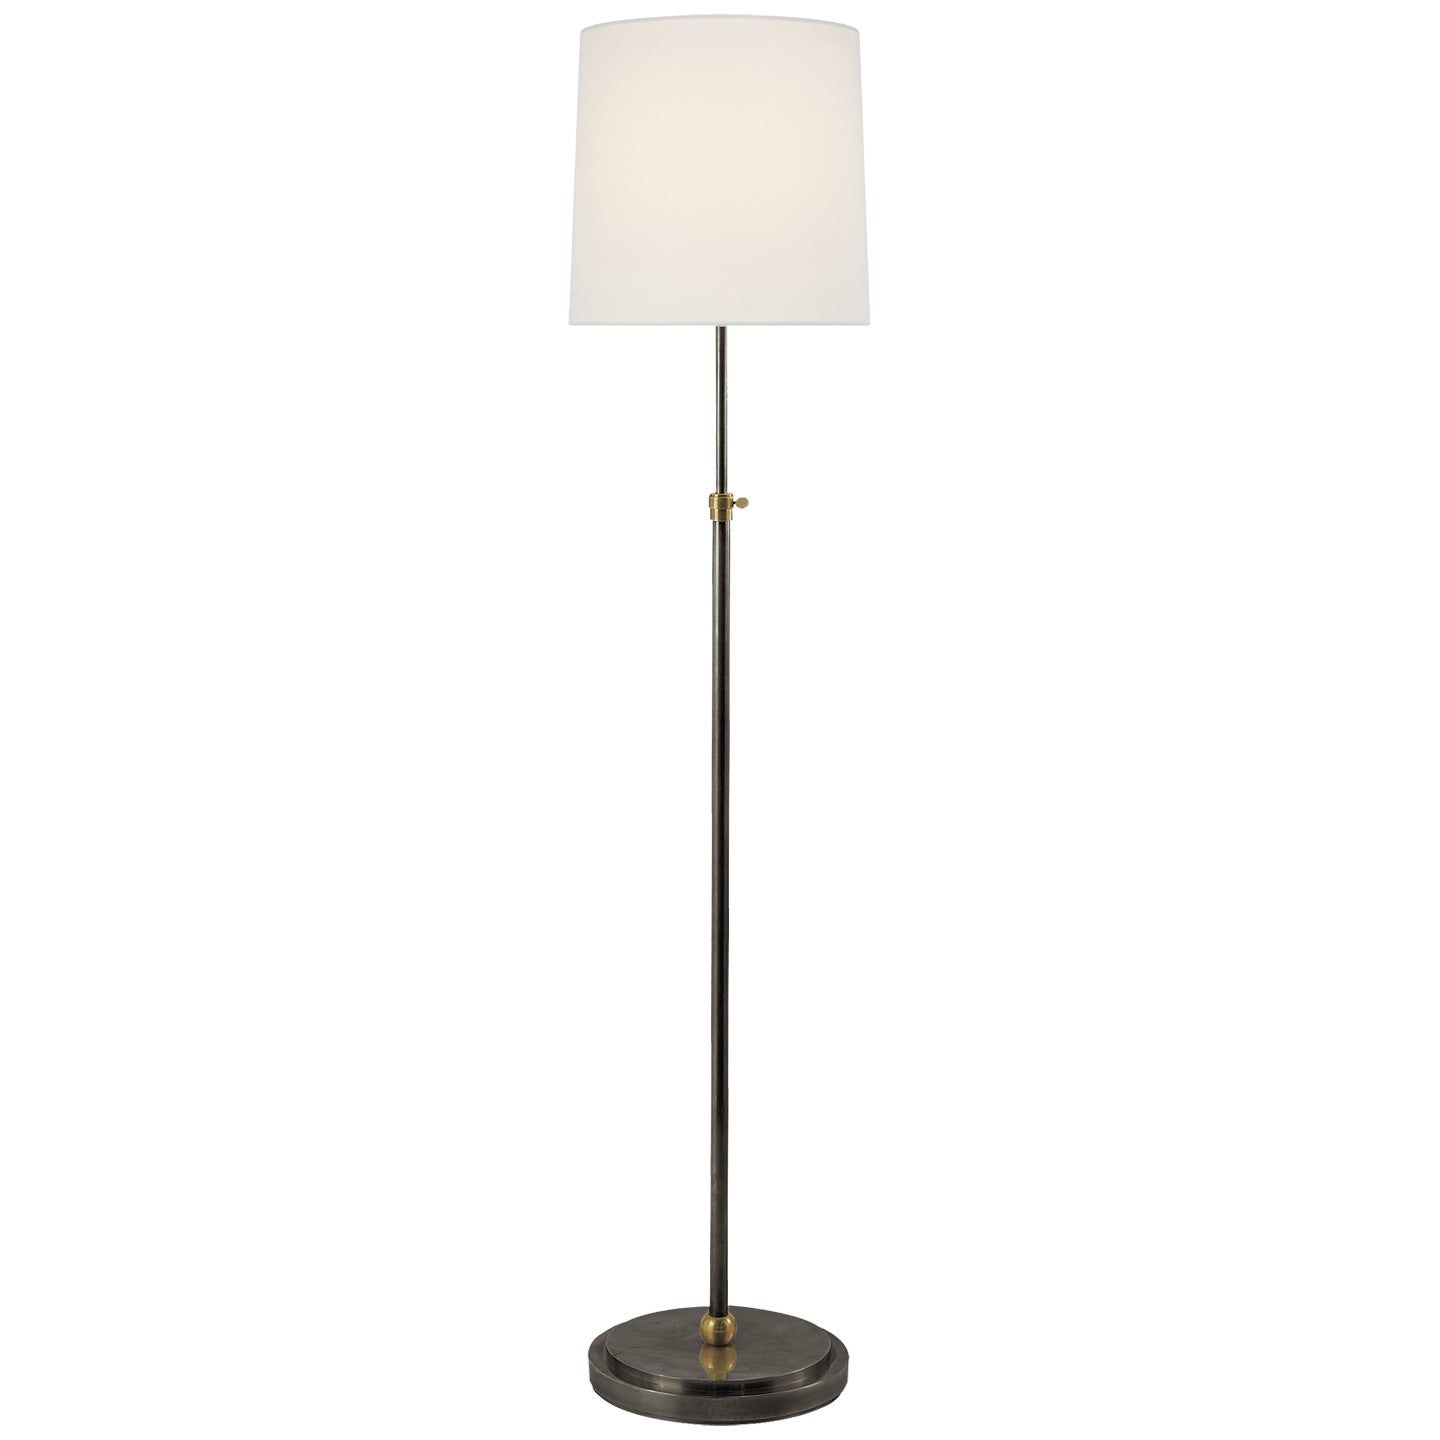 Visual Comfort Signature - TOB 1002BZ/HAB-L - One Light Floor Lamp - Bryant - Bronze and Hand-Rubbed Antique Brass